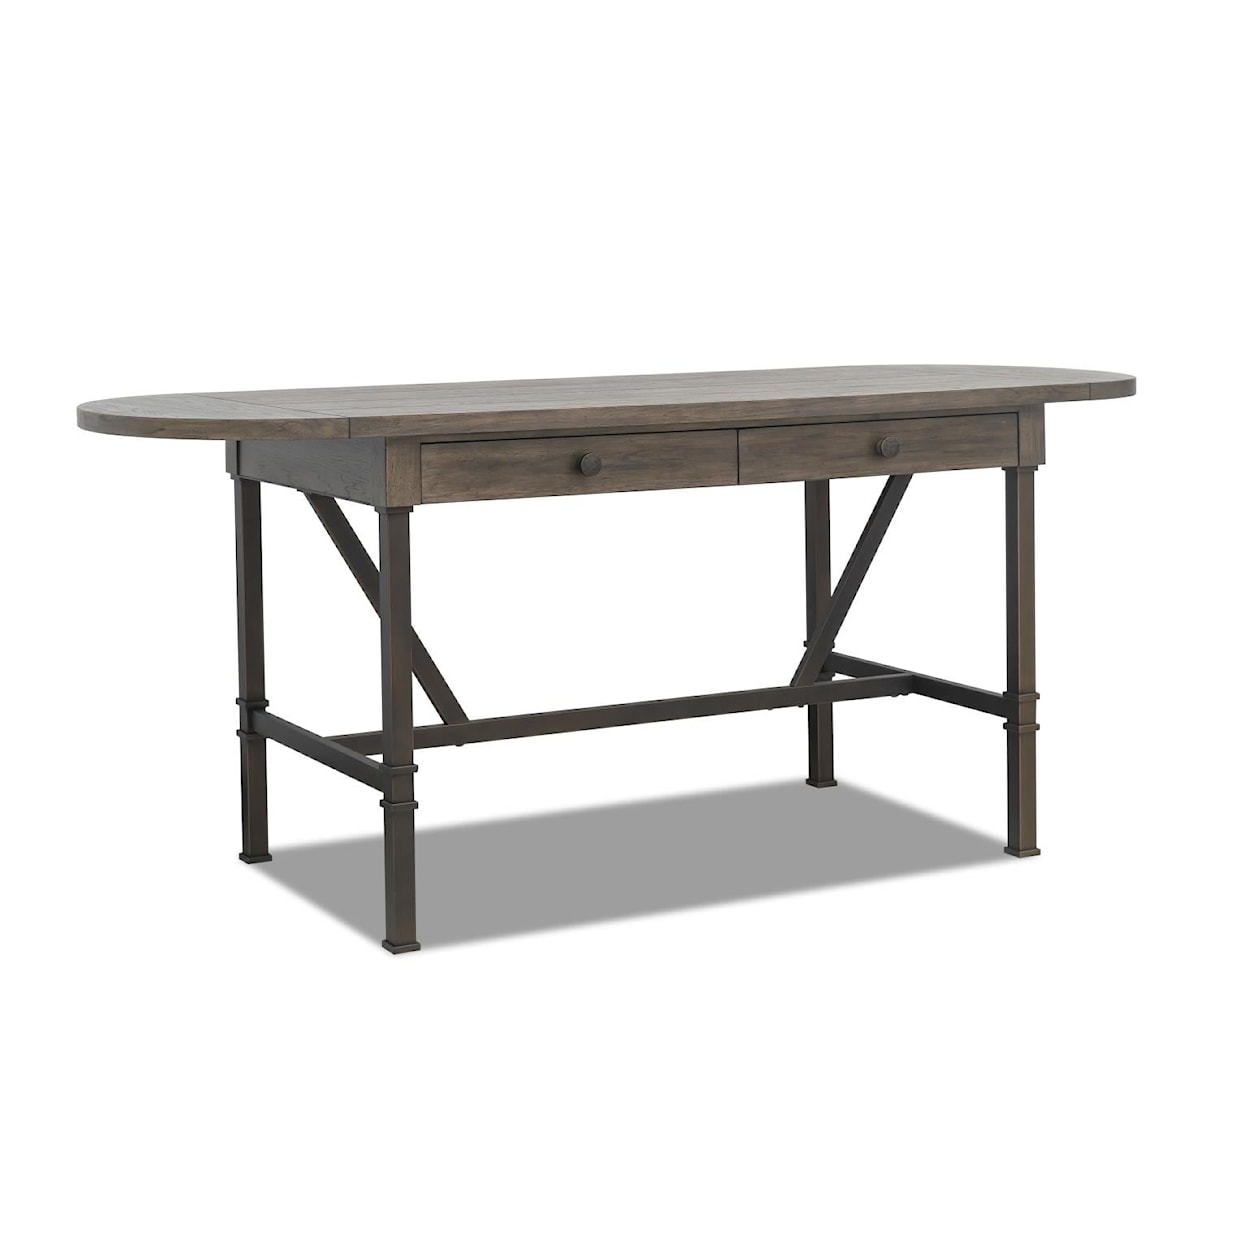 Trisha Yearwood Home Collection by Legacy Classic Hometown Counter Height Table